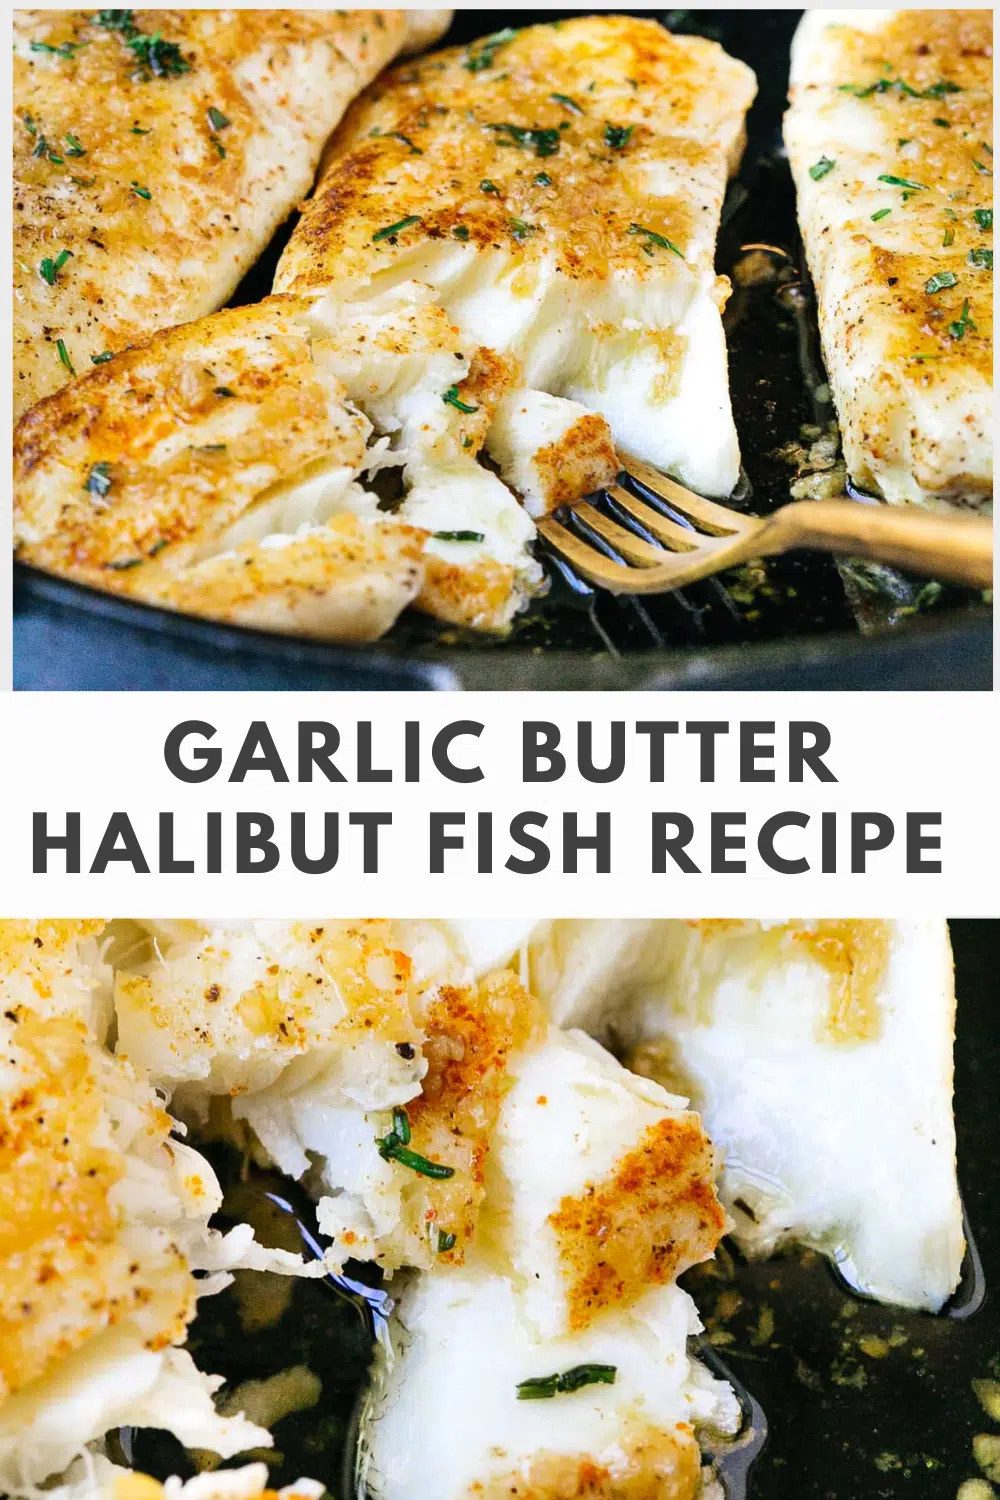 titled photo collage (and shown): Garlic Bitter Halibut Fish Recipe